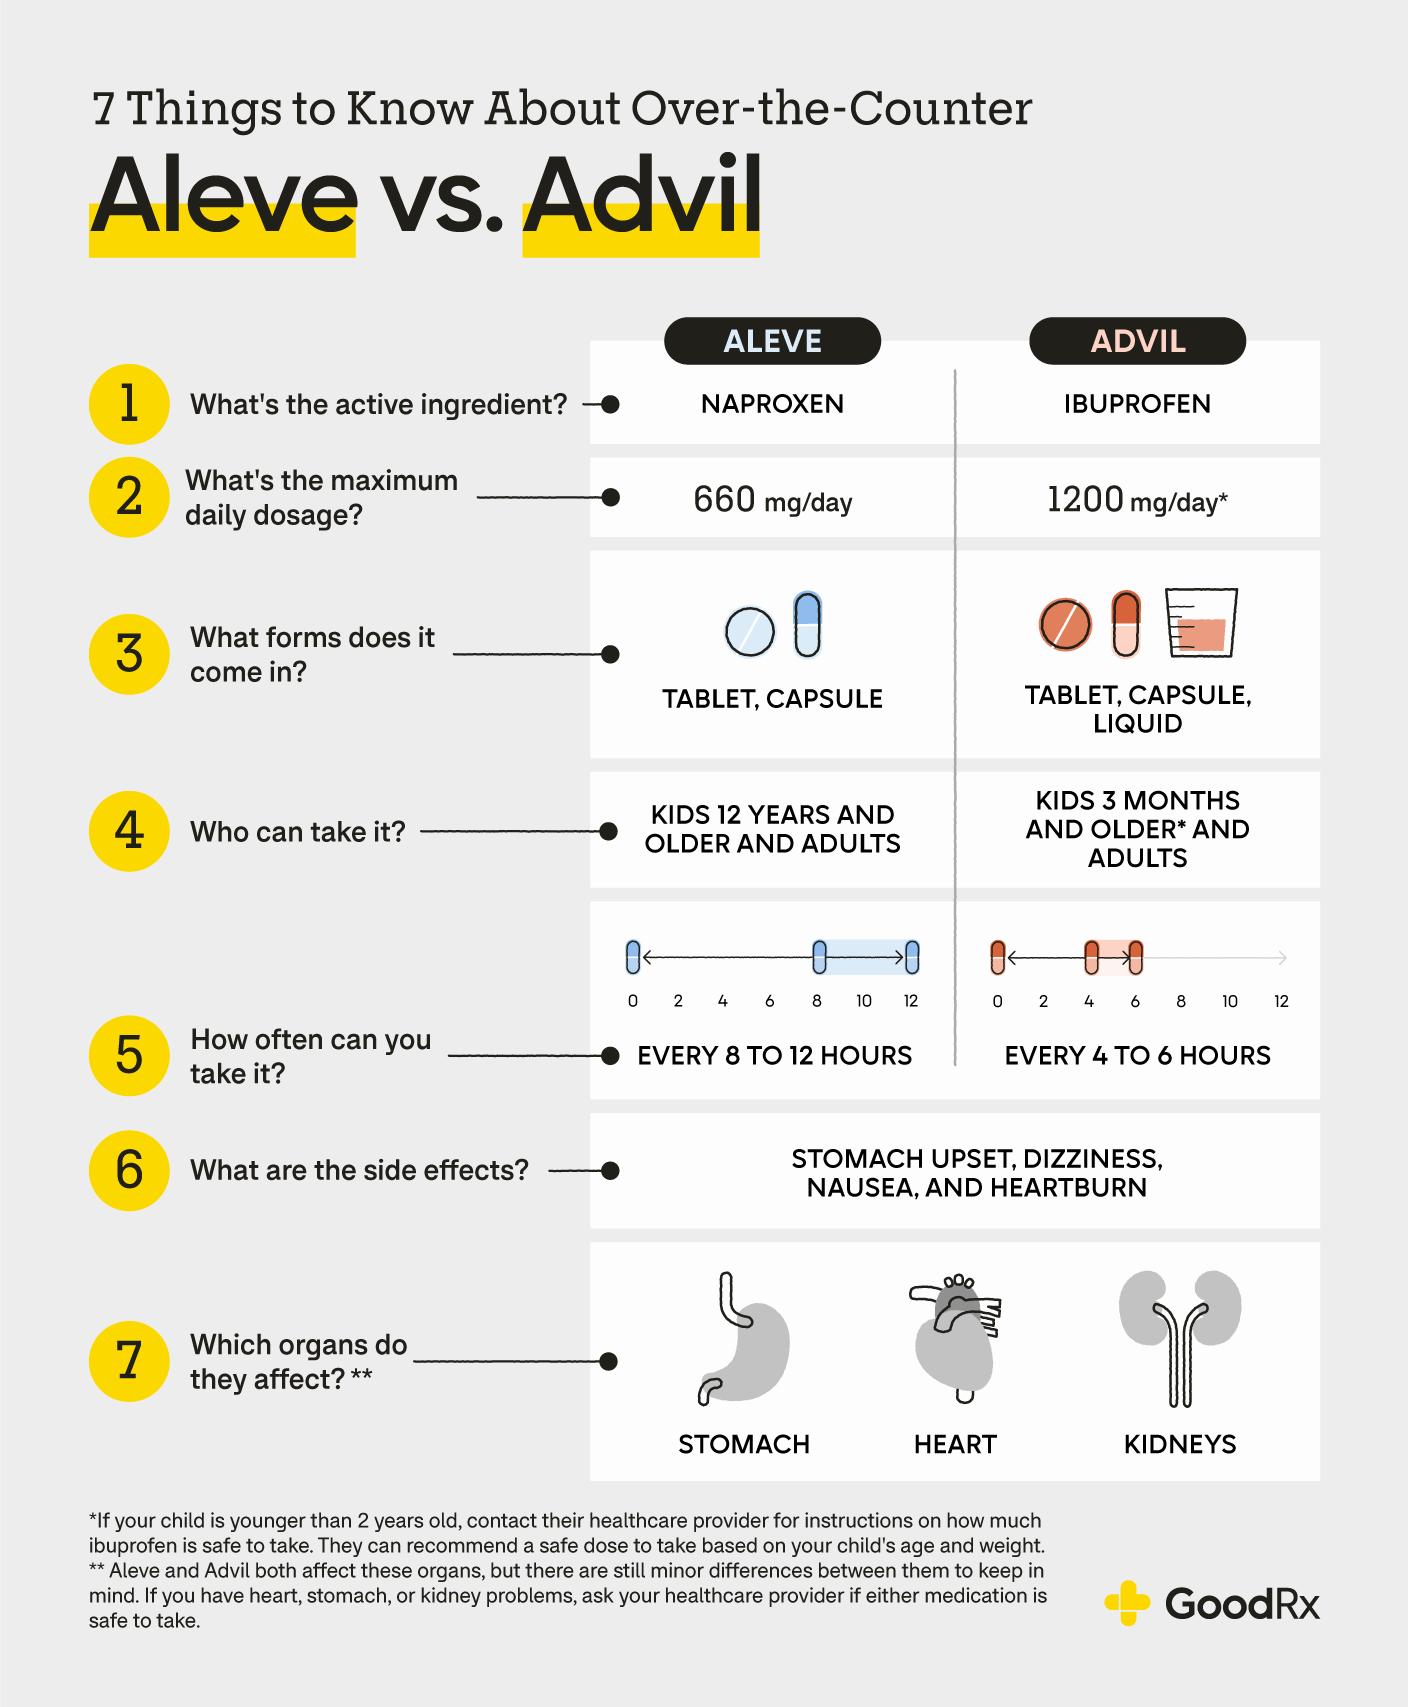 A table comparing Aleve and Advil, two over-the-counter pain relievers, on 7 different factors.